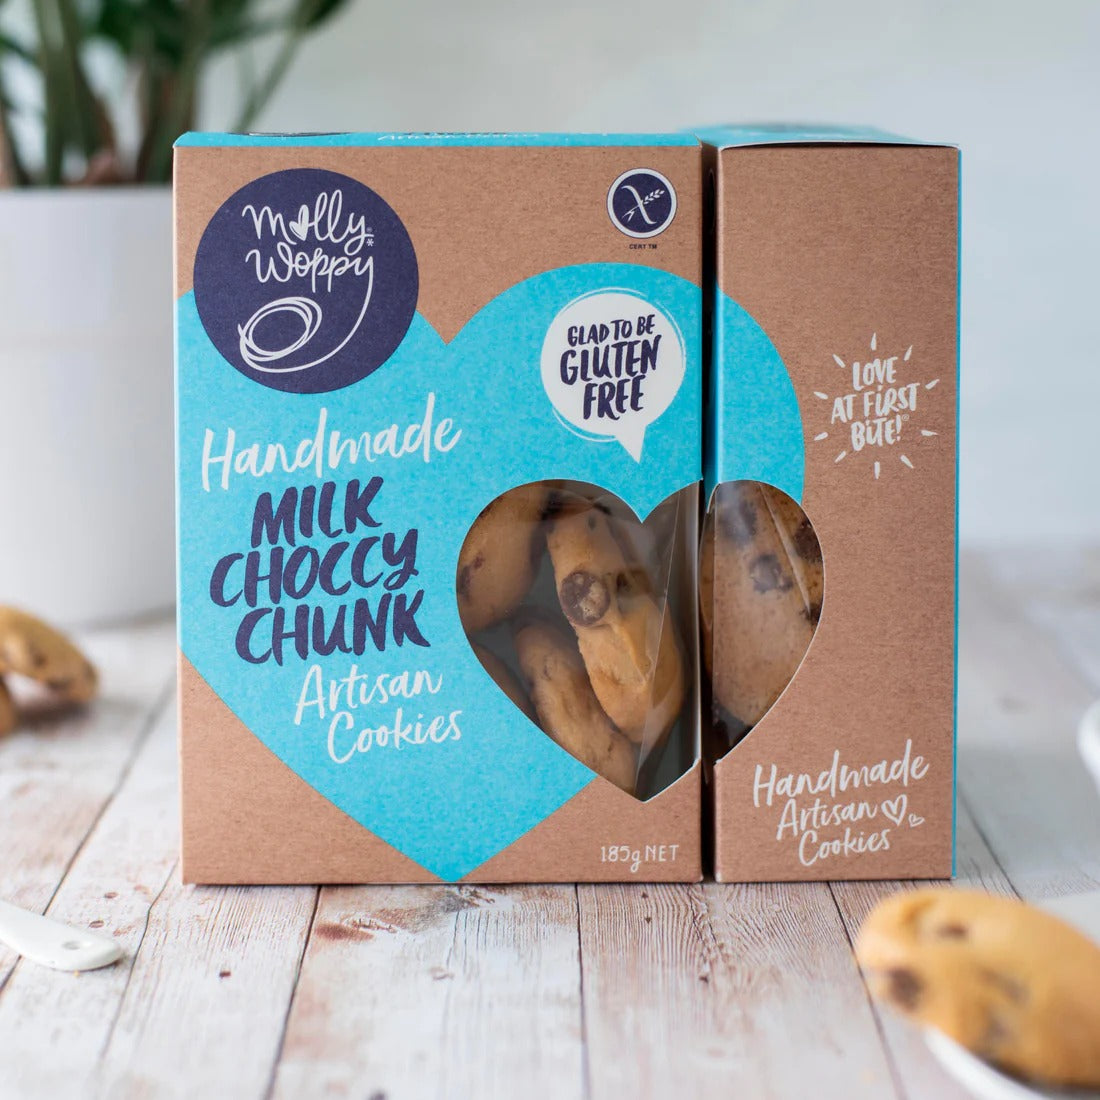 Molly Woppy Gluten Free Artisan Milk Choccy Chunk Cookies available at Bear & Moo